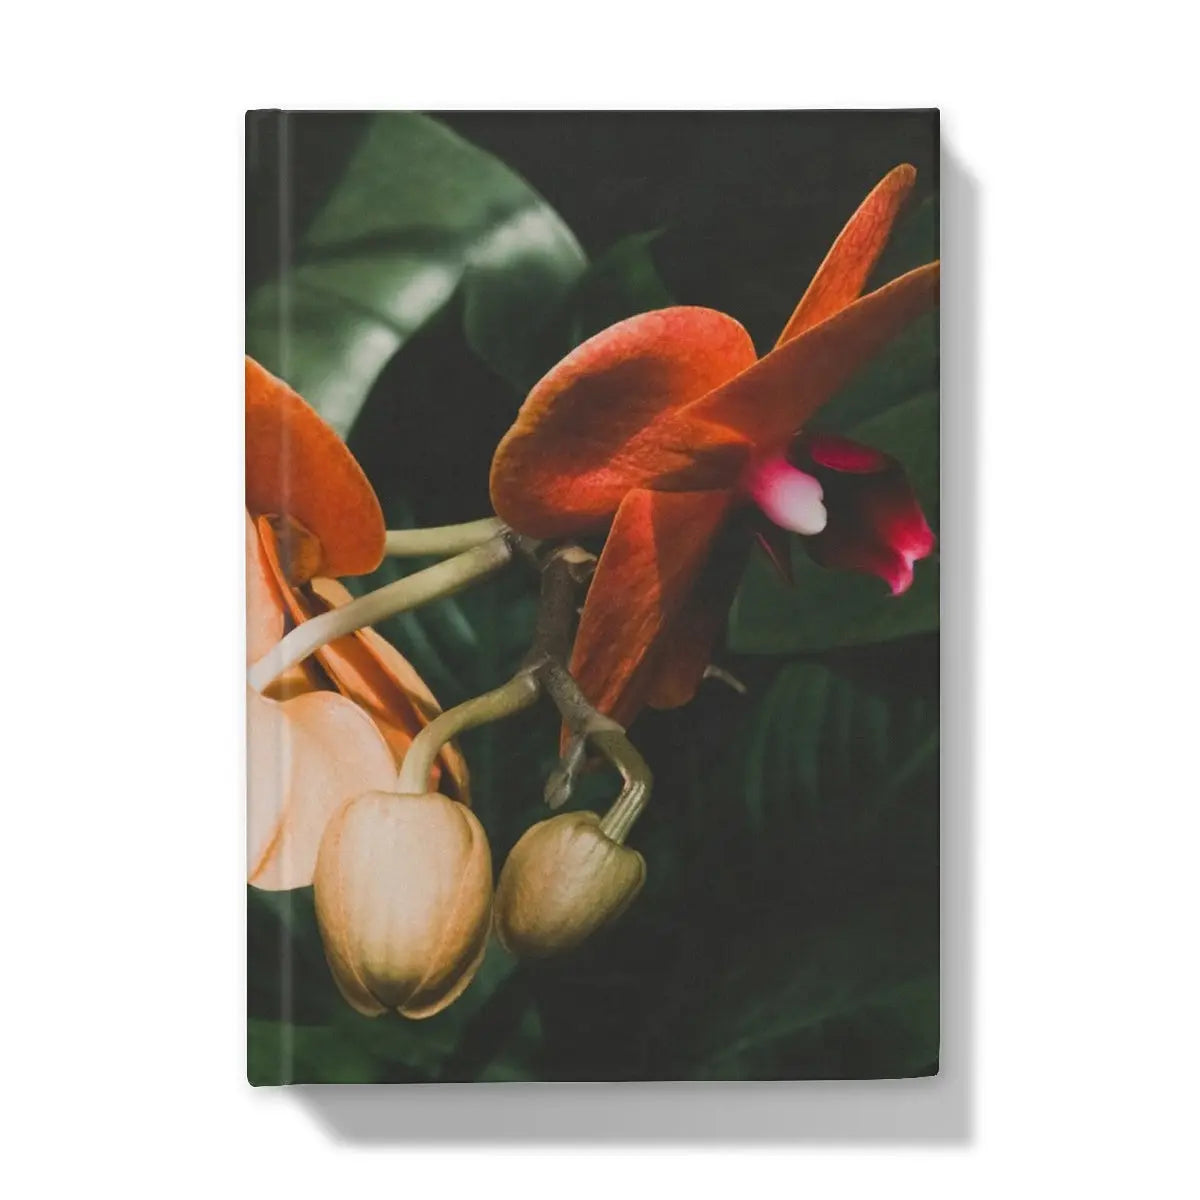 Floral Coral Hardback Journal - 5’x7’ / 5’ x 7’ - Plain Paper - Notebooks & Notepads - Aesthetic Art